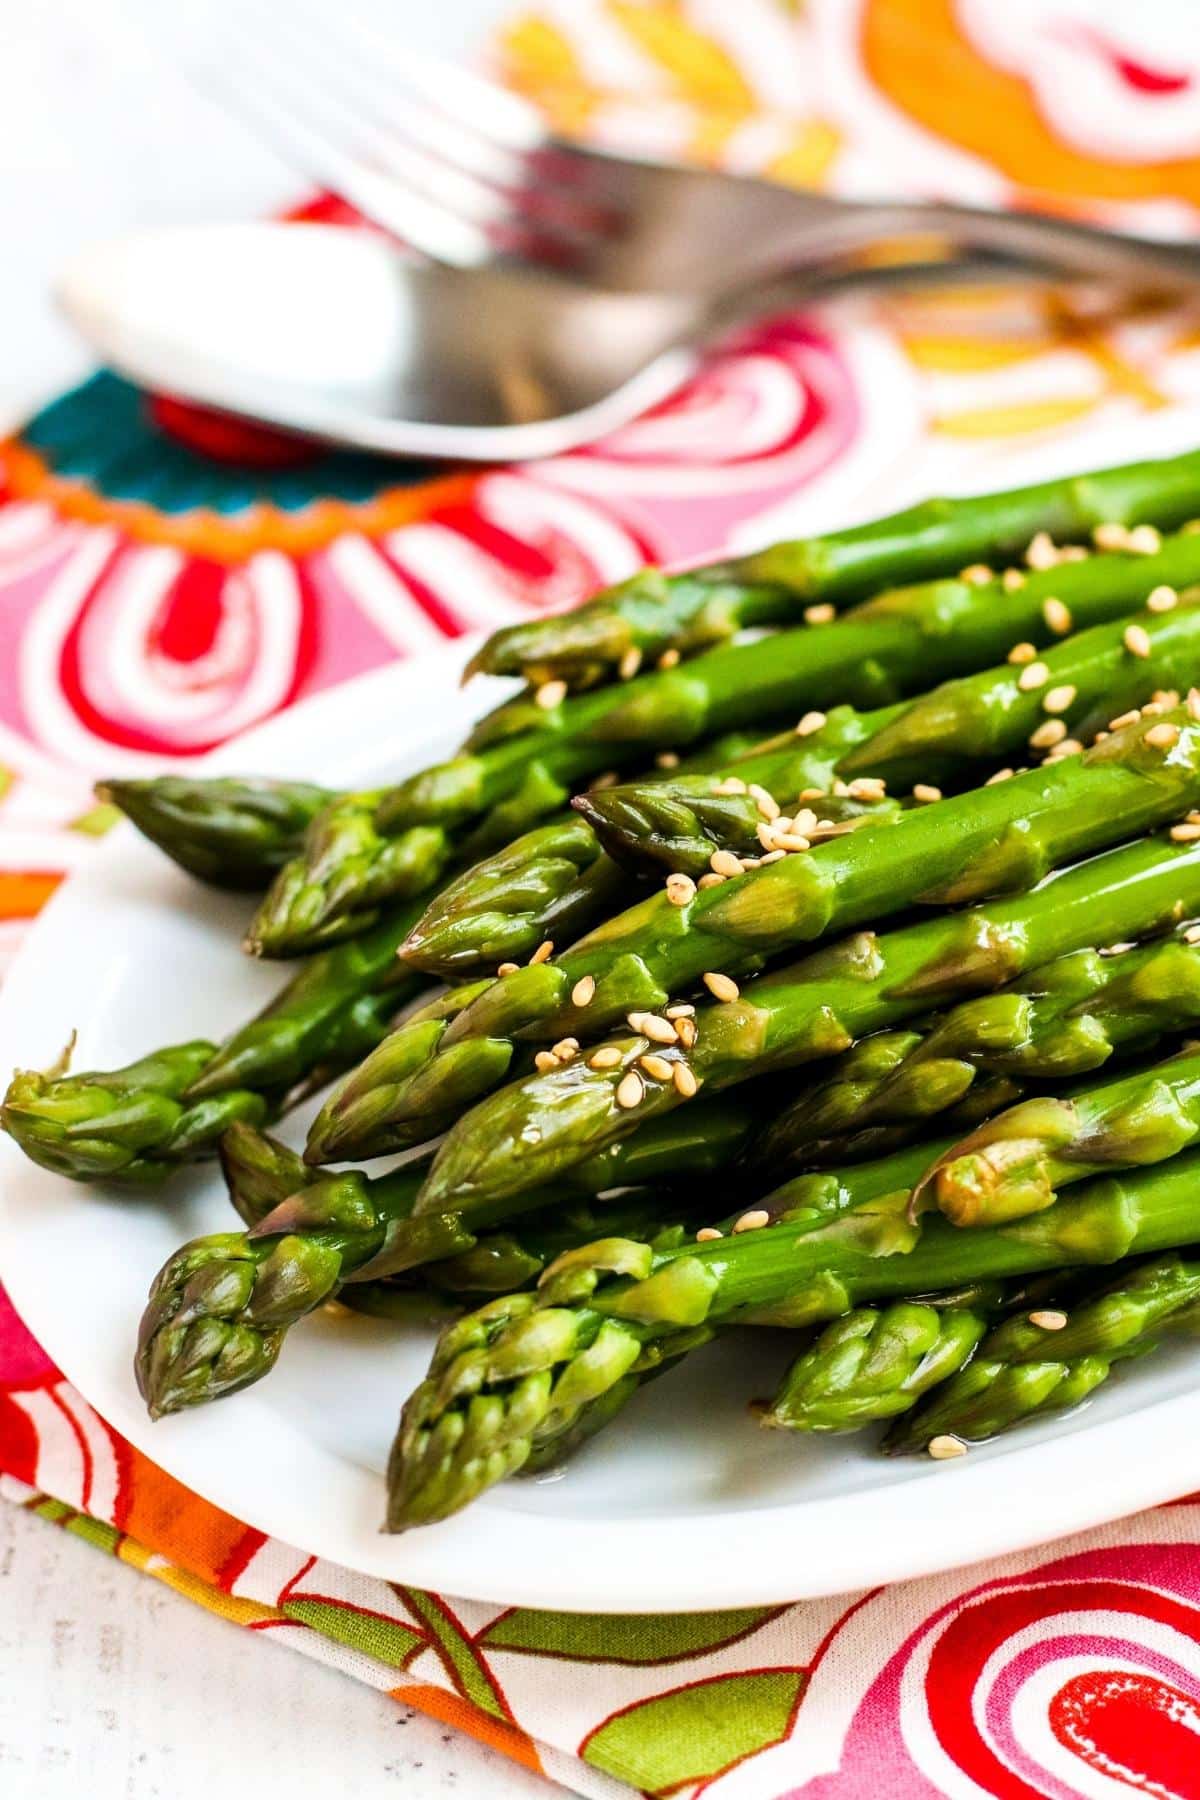 Platter of sesame seed topped marinated asparagus and serving utensils on a floral napkin.